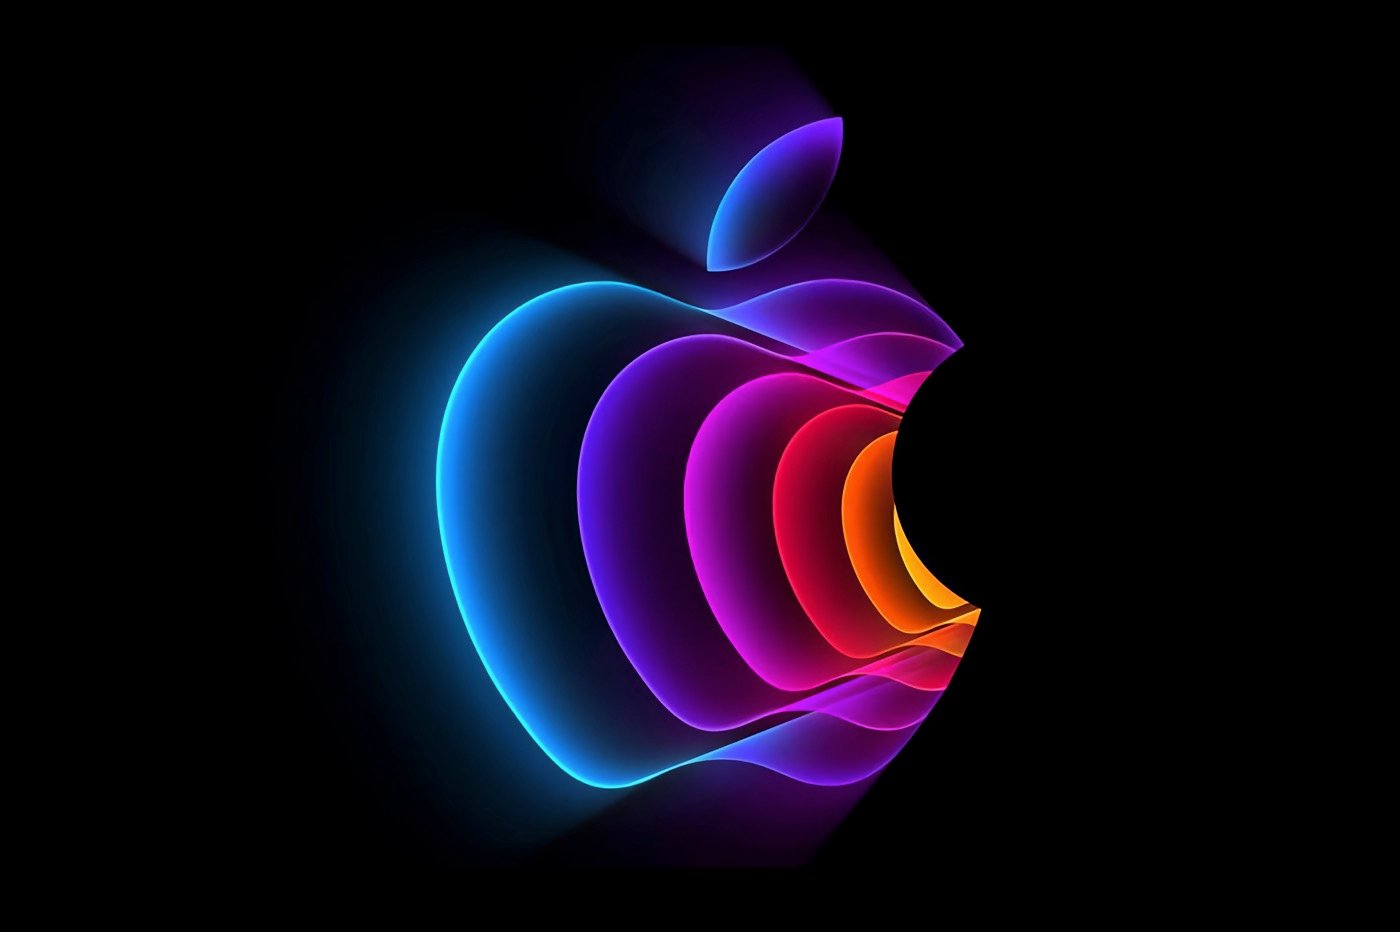 multicolored Apple logo on a black background